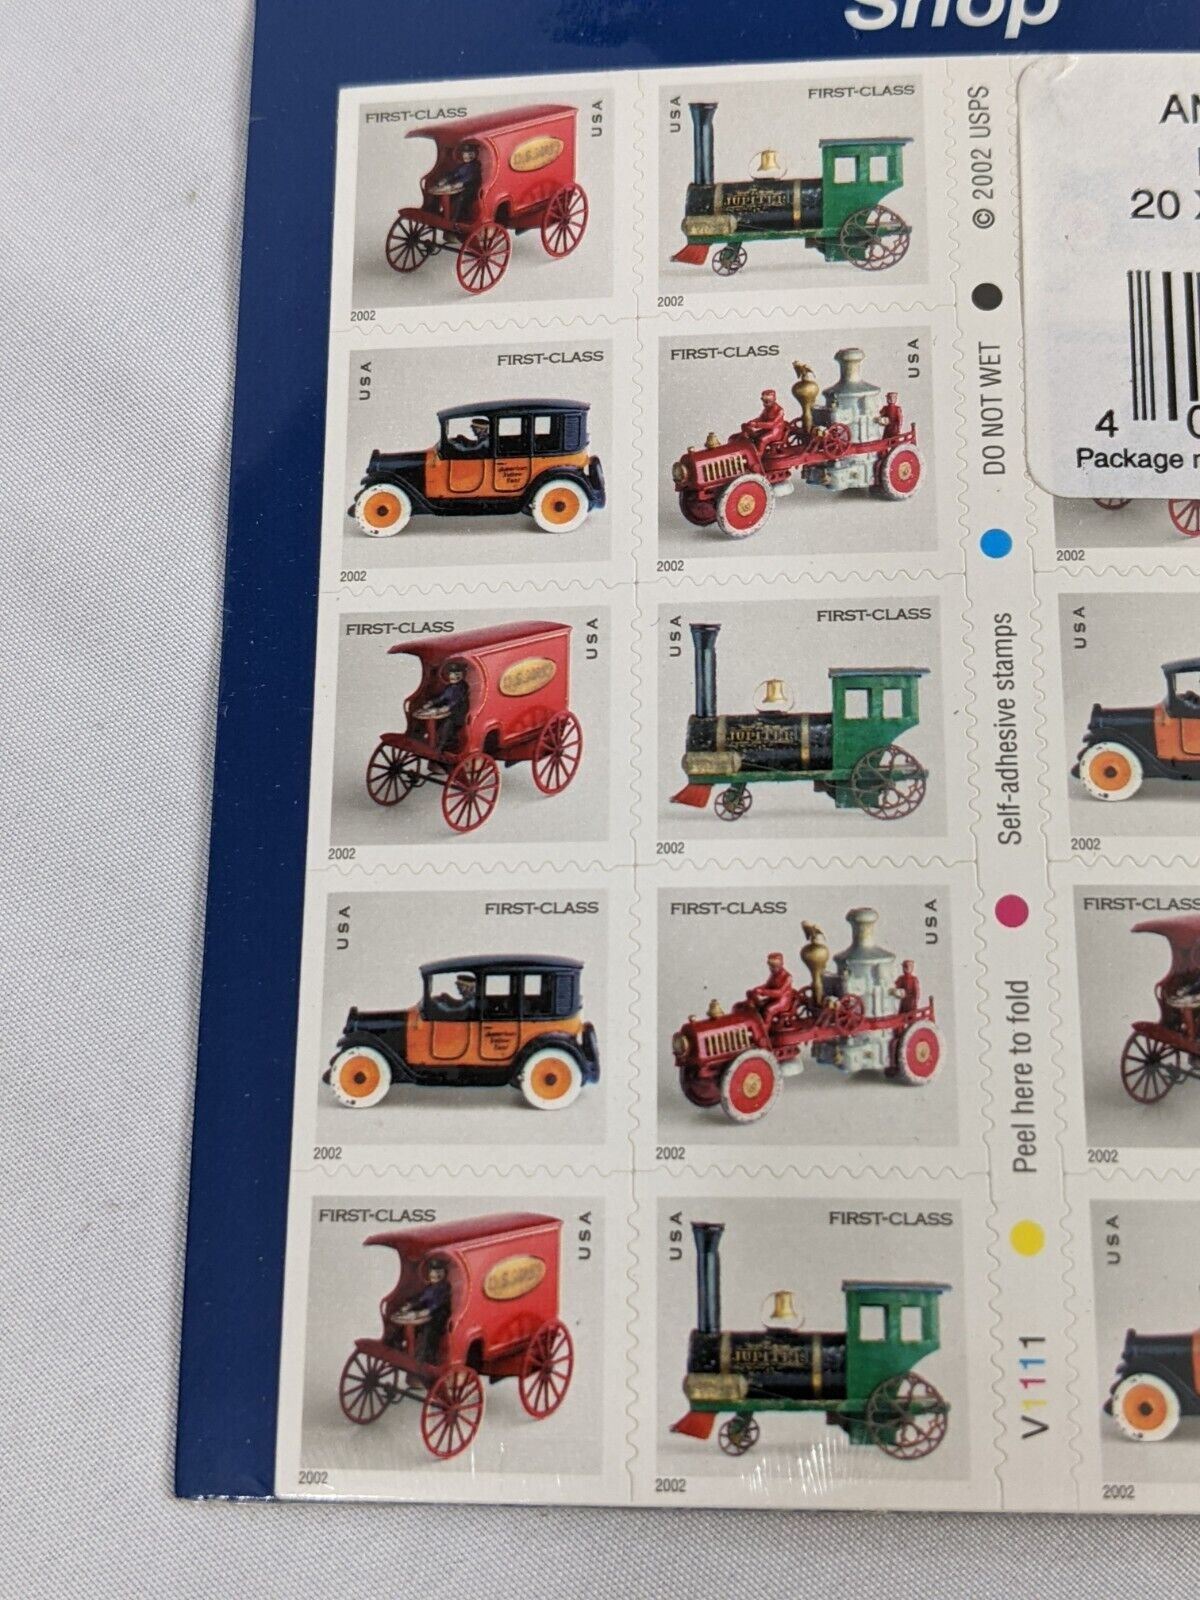 United States Postal Service USPS Self Adhesive Stamps Antique Toys #671501